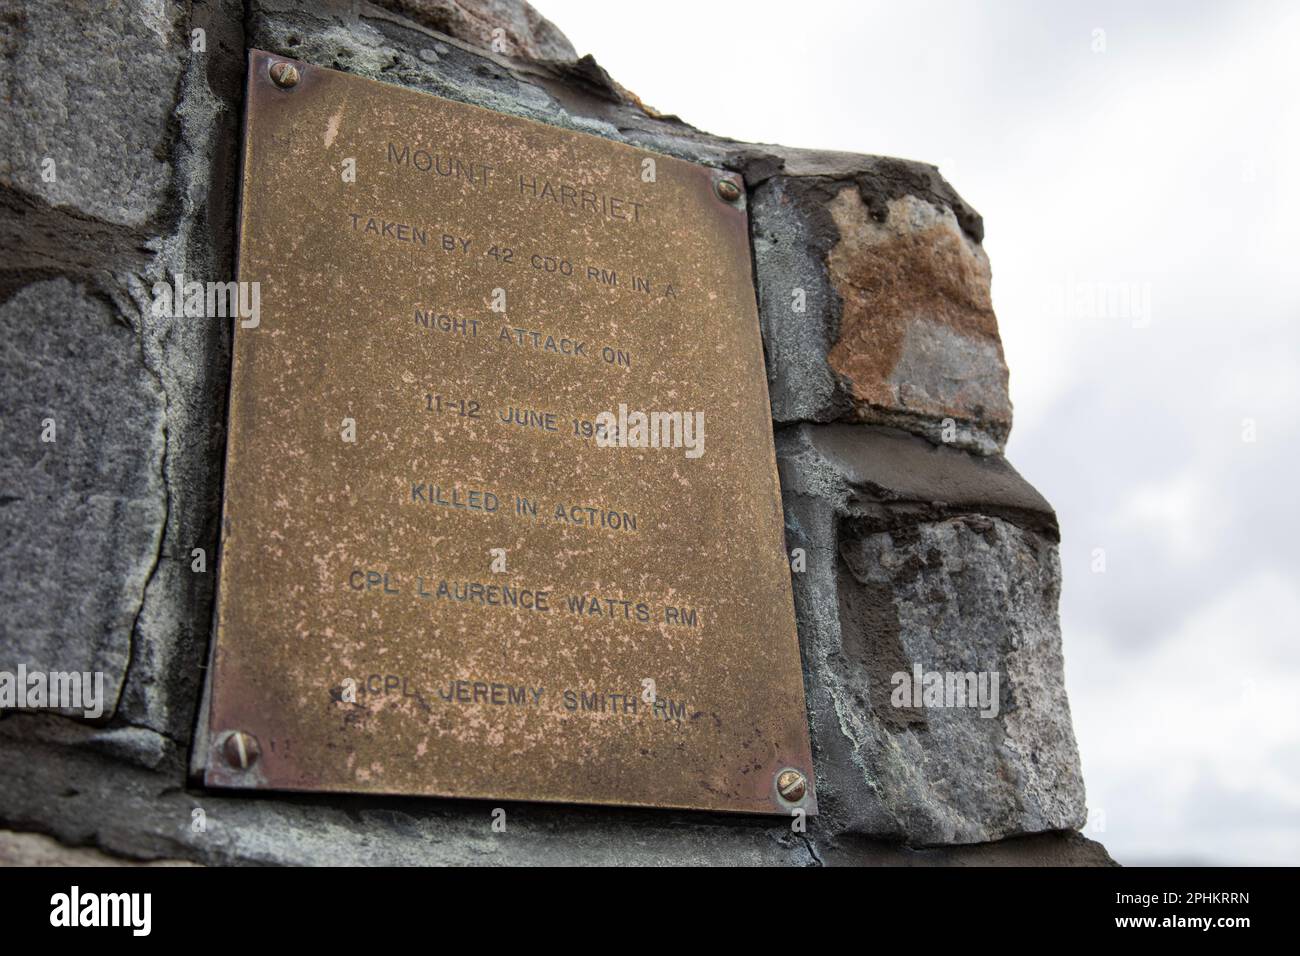 Plaque on the summit of Mount Harriet, Falkland Islands, commemorating the soldiers of 42 Commando, Royal Marines, who were killed in Falklands War. Stock Photo